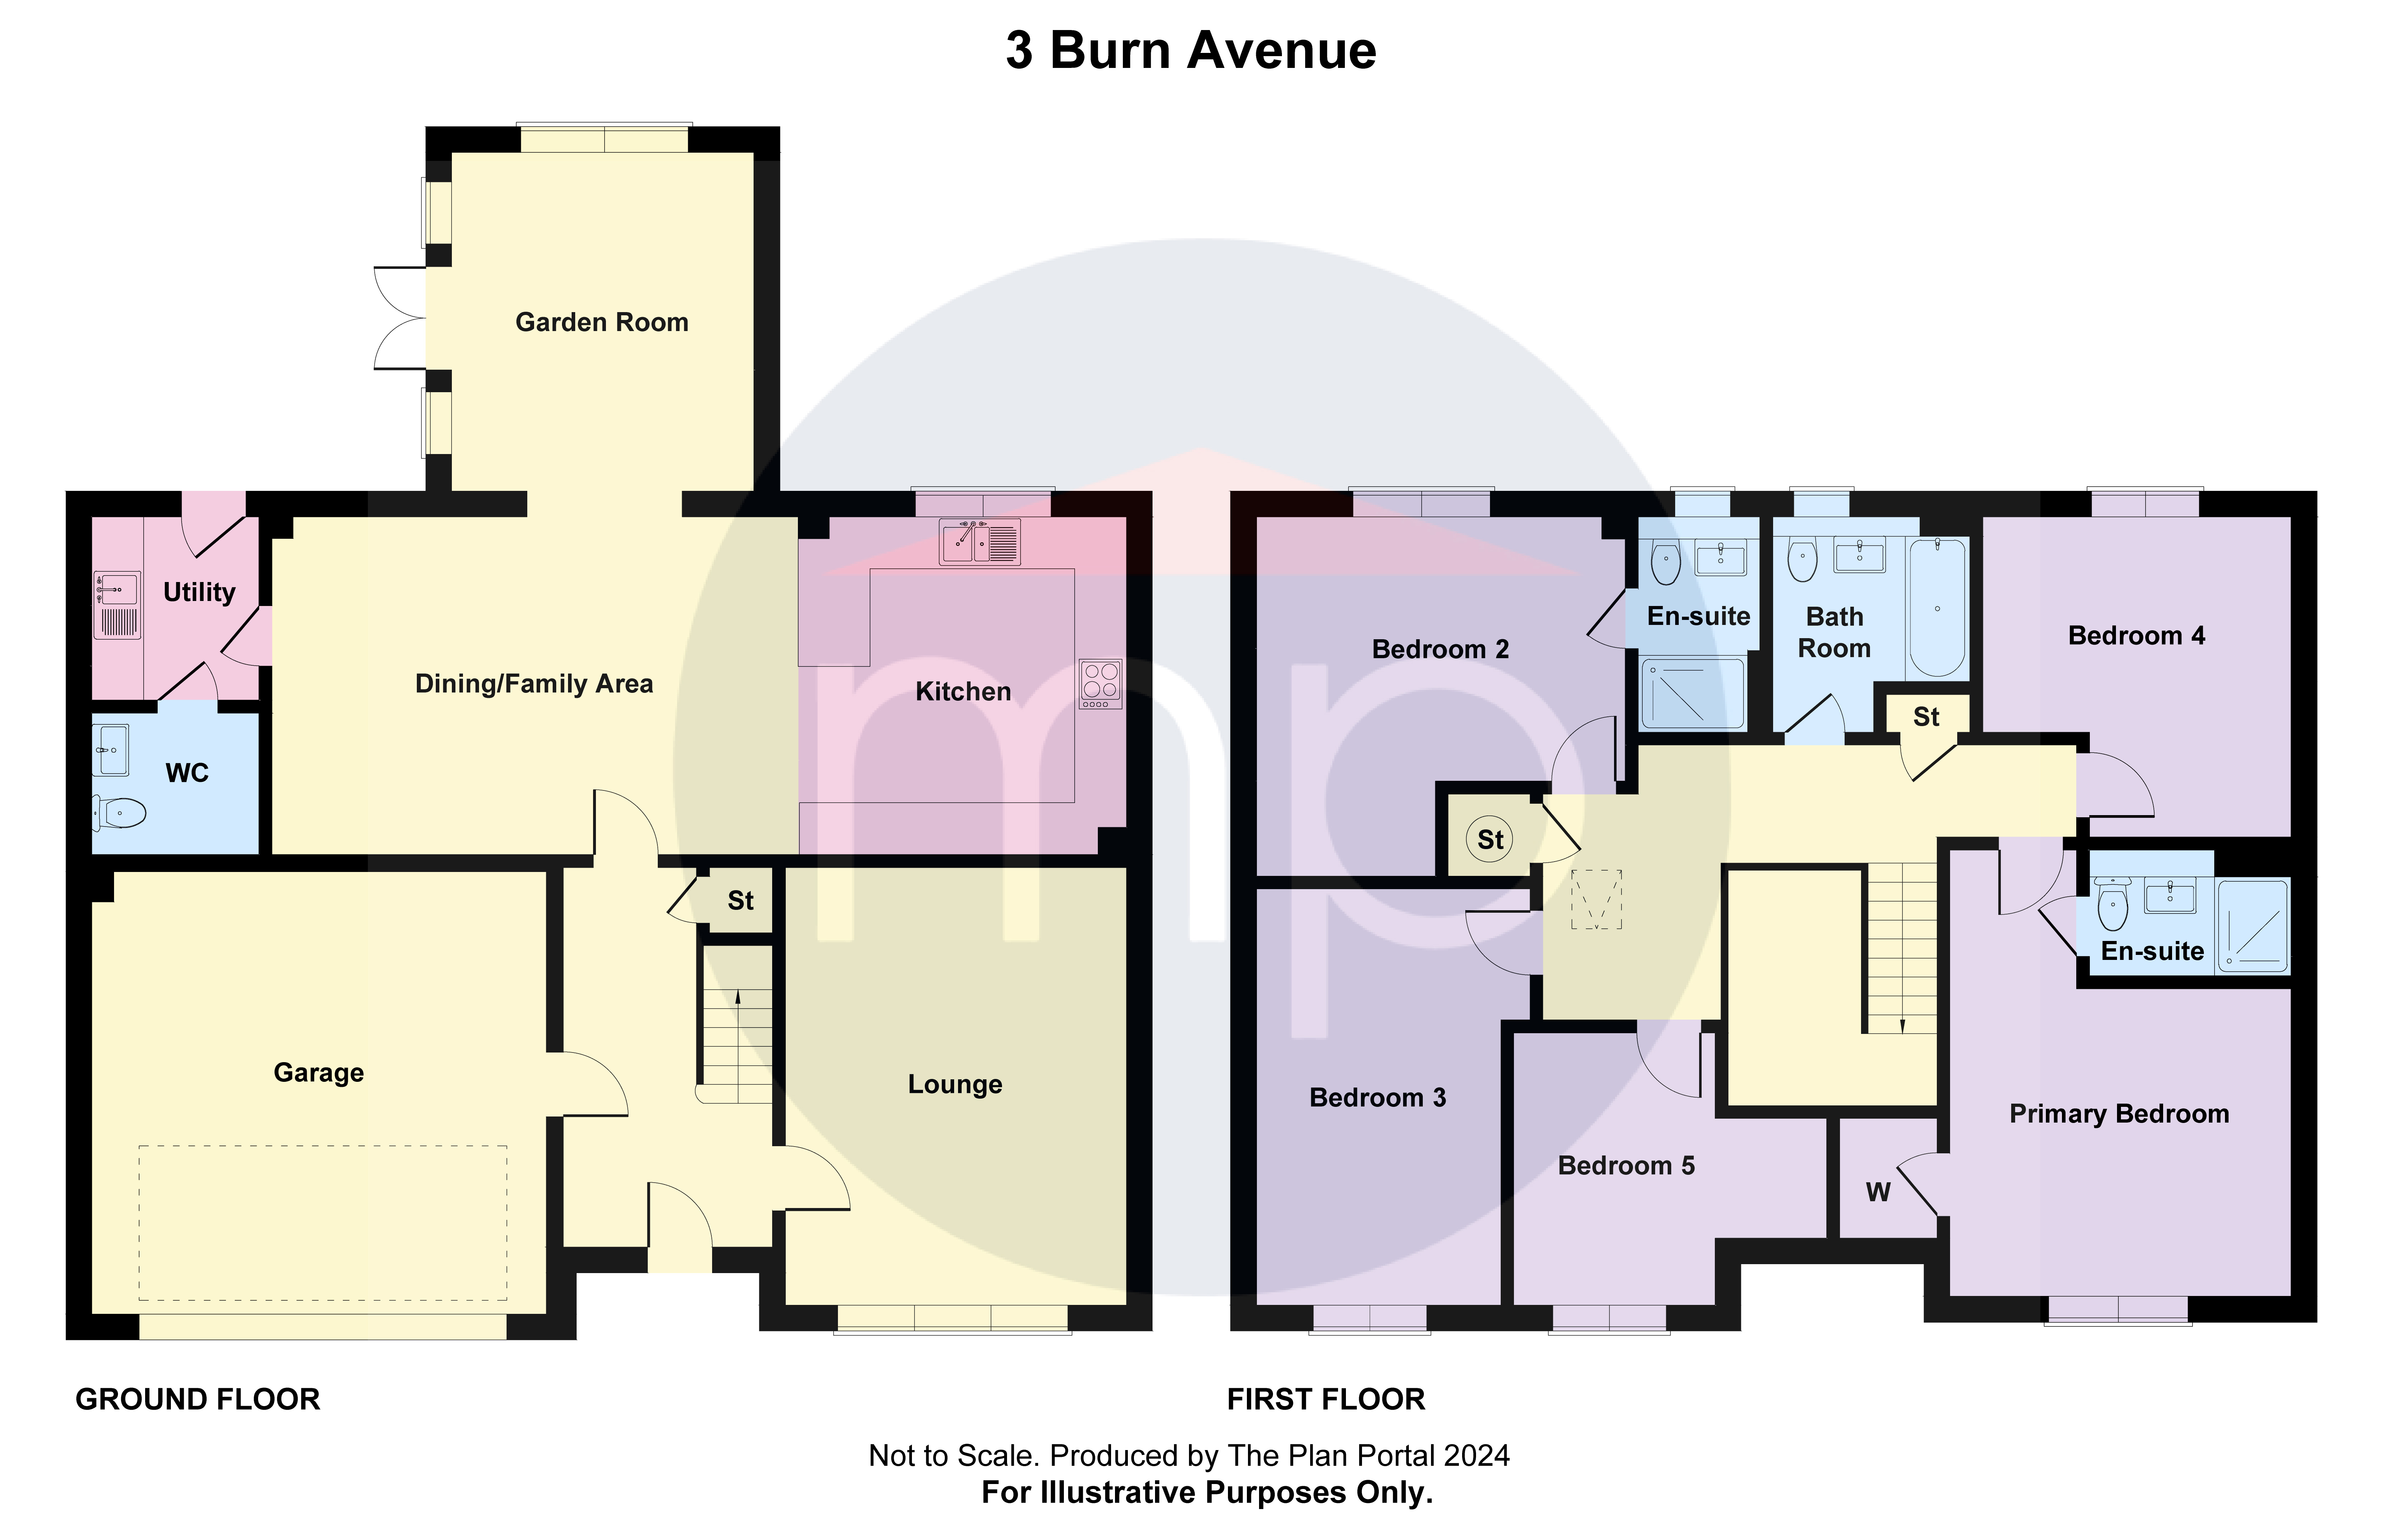 5 bed house for sale - Property floorplan